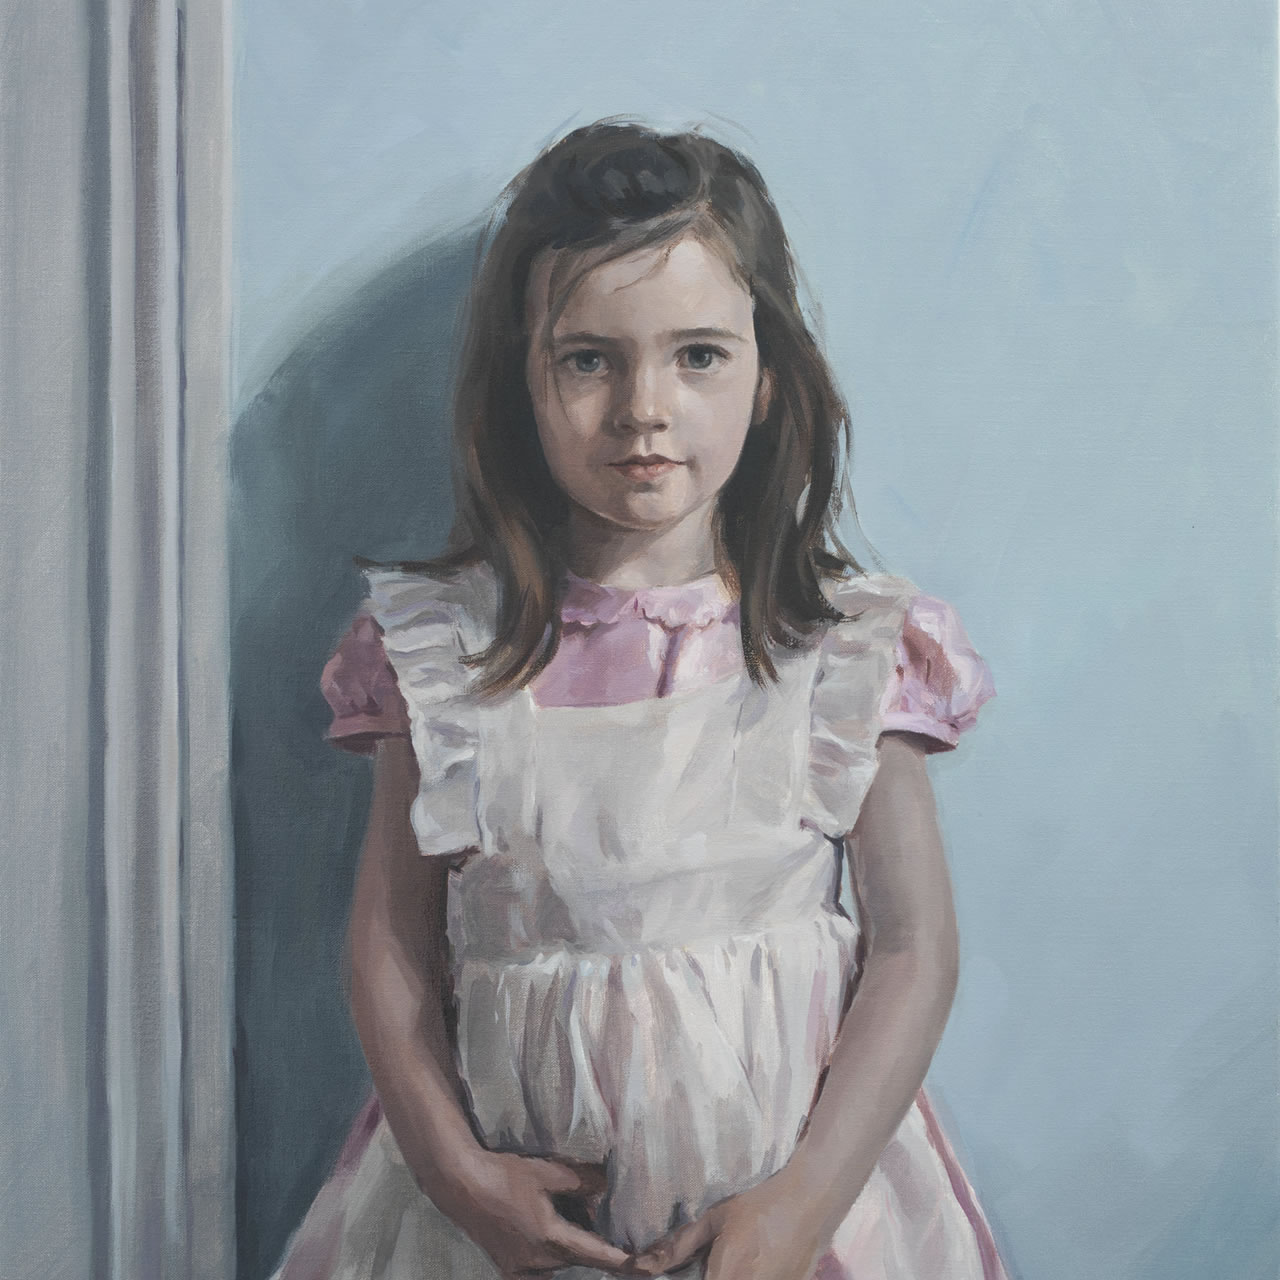 Royal Society of Portrait Painters